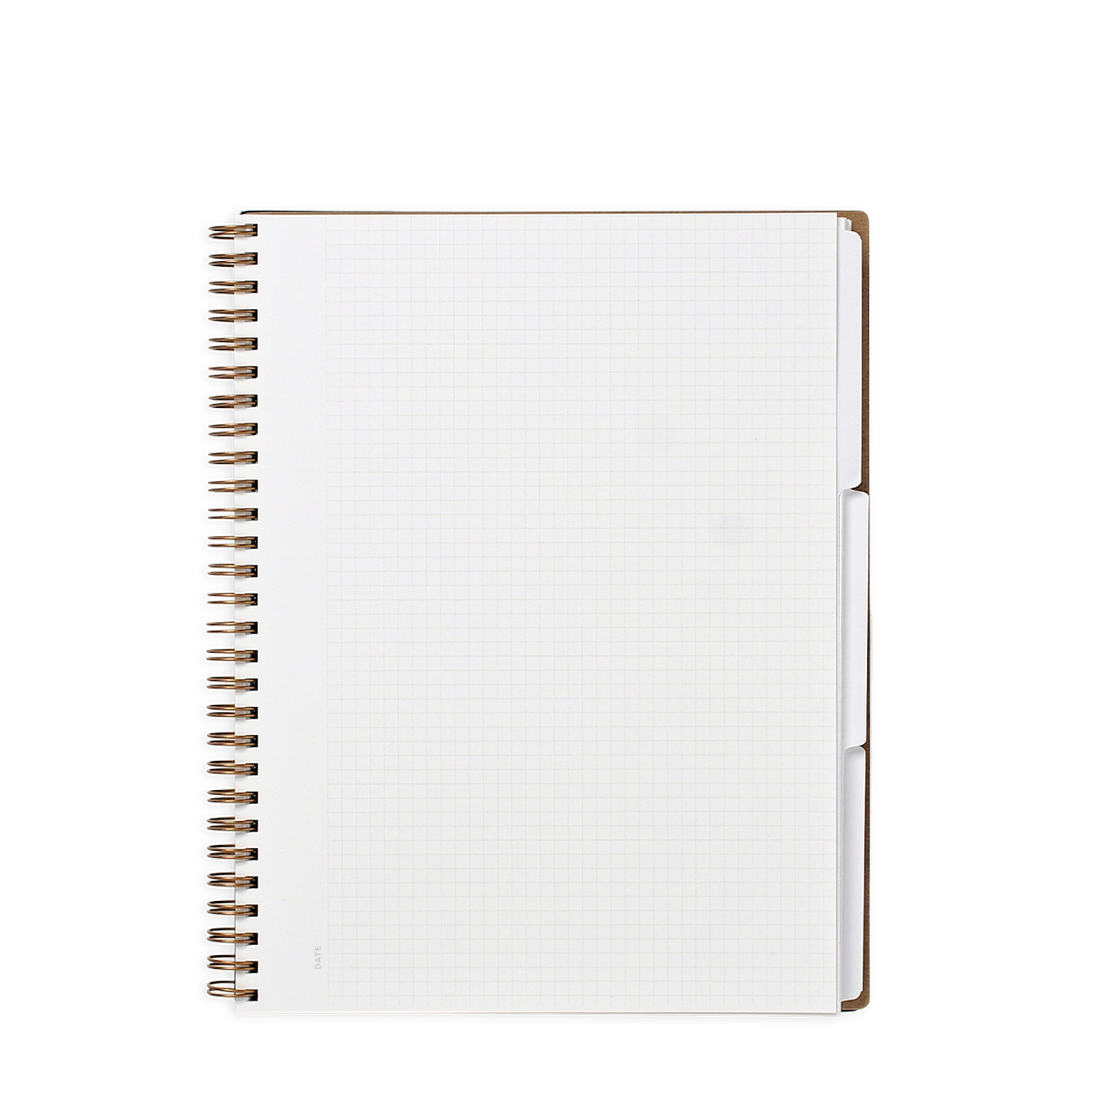 APPOINTED - THREE SUBJECT NOTEBOOK - YELLOW - GRID